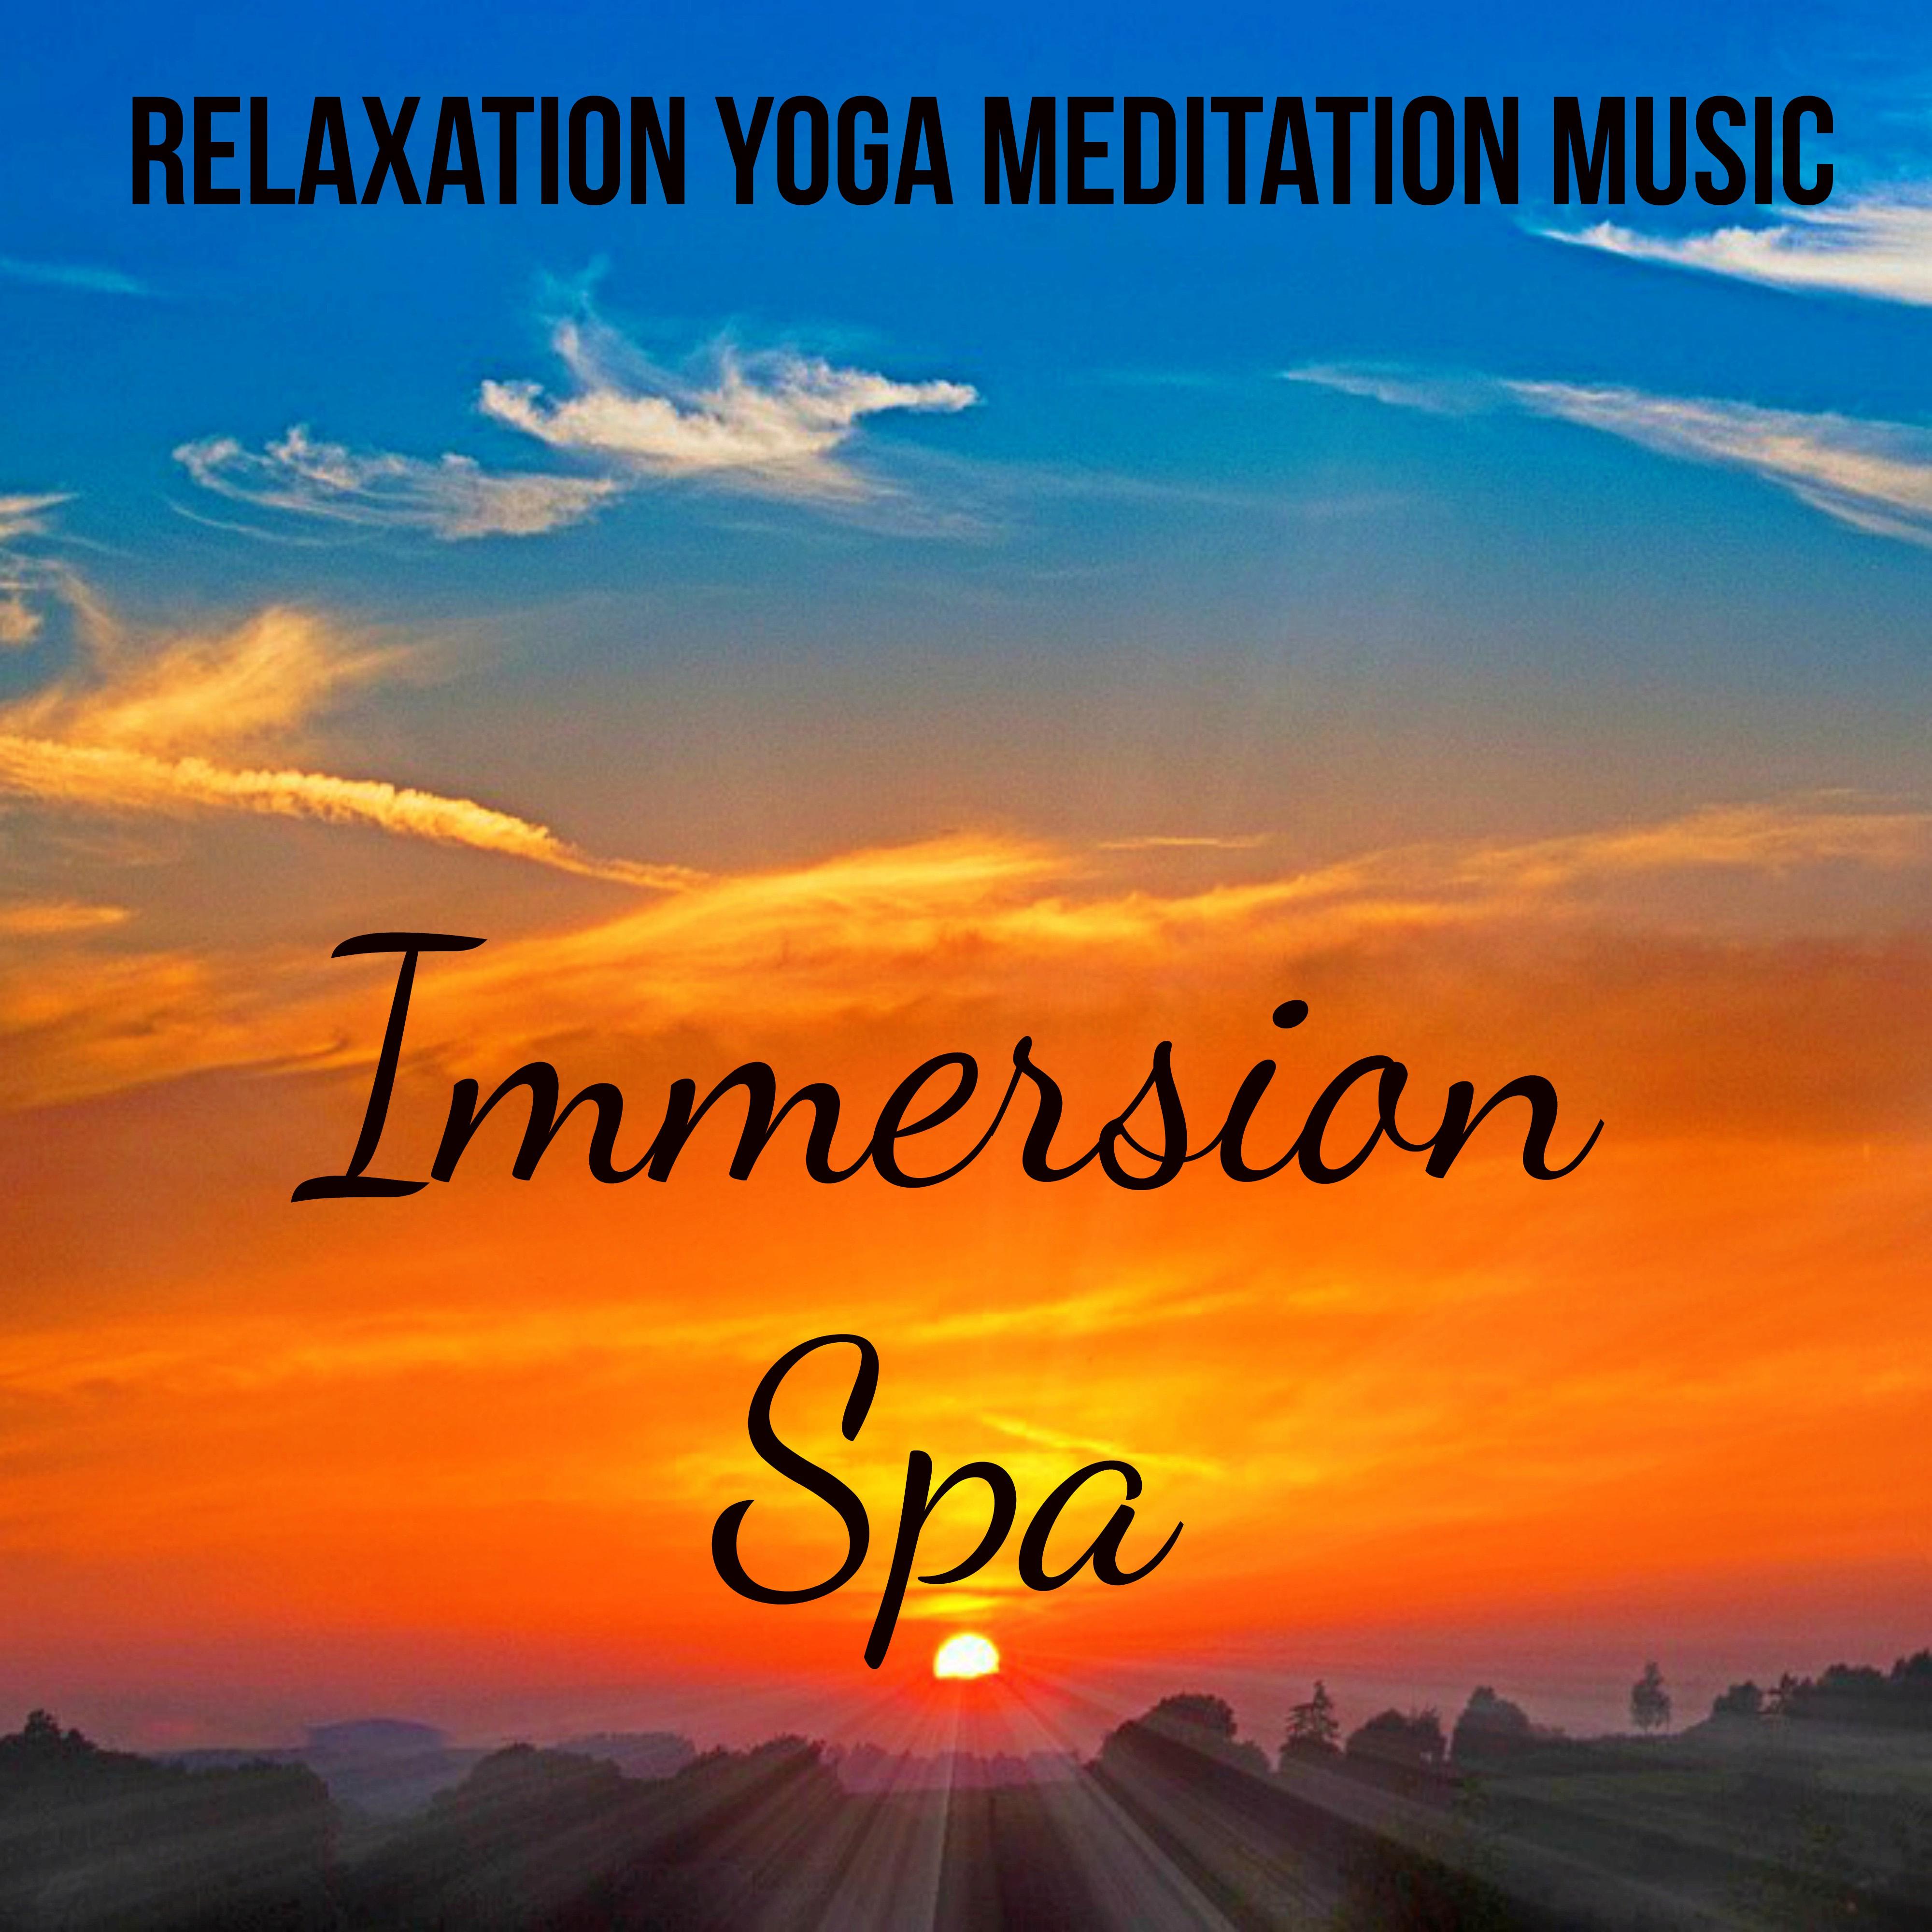 Immersion Spa - Relaxation Meditation Yoga Music for Reiki Healing Chakra Therapy Wellness Days with Instrumental New Age Sounds